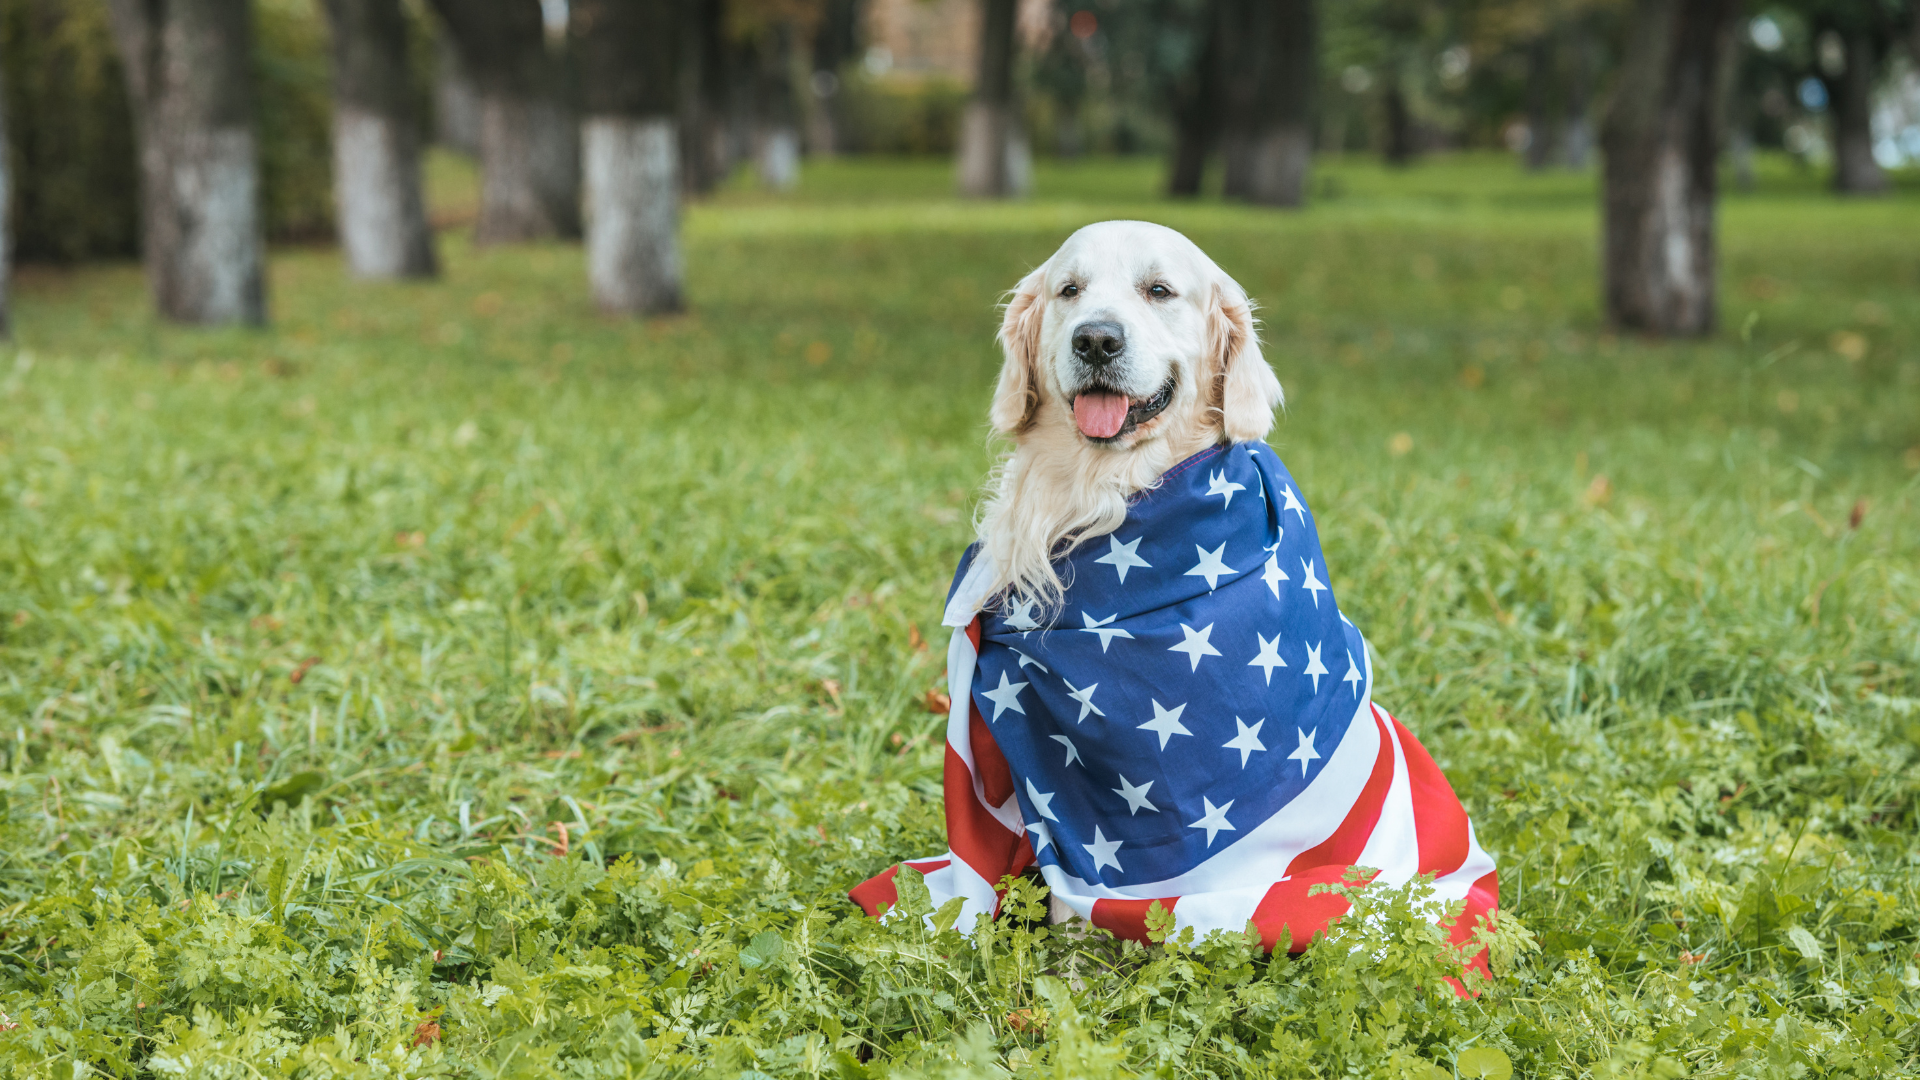 Most Popular Dogs in America